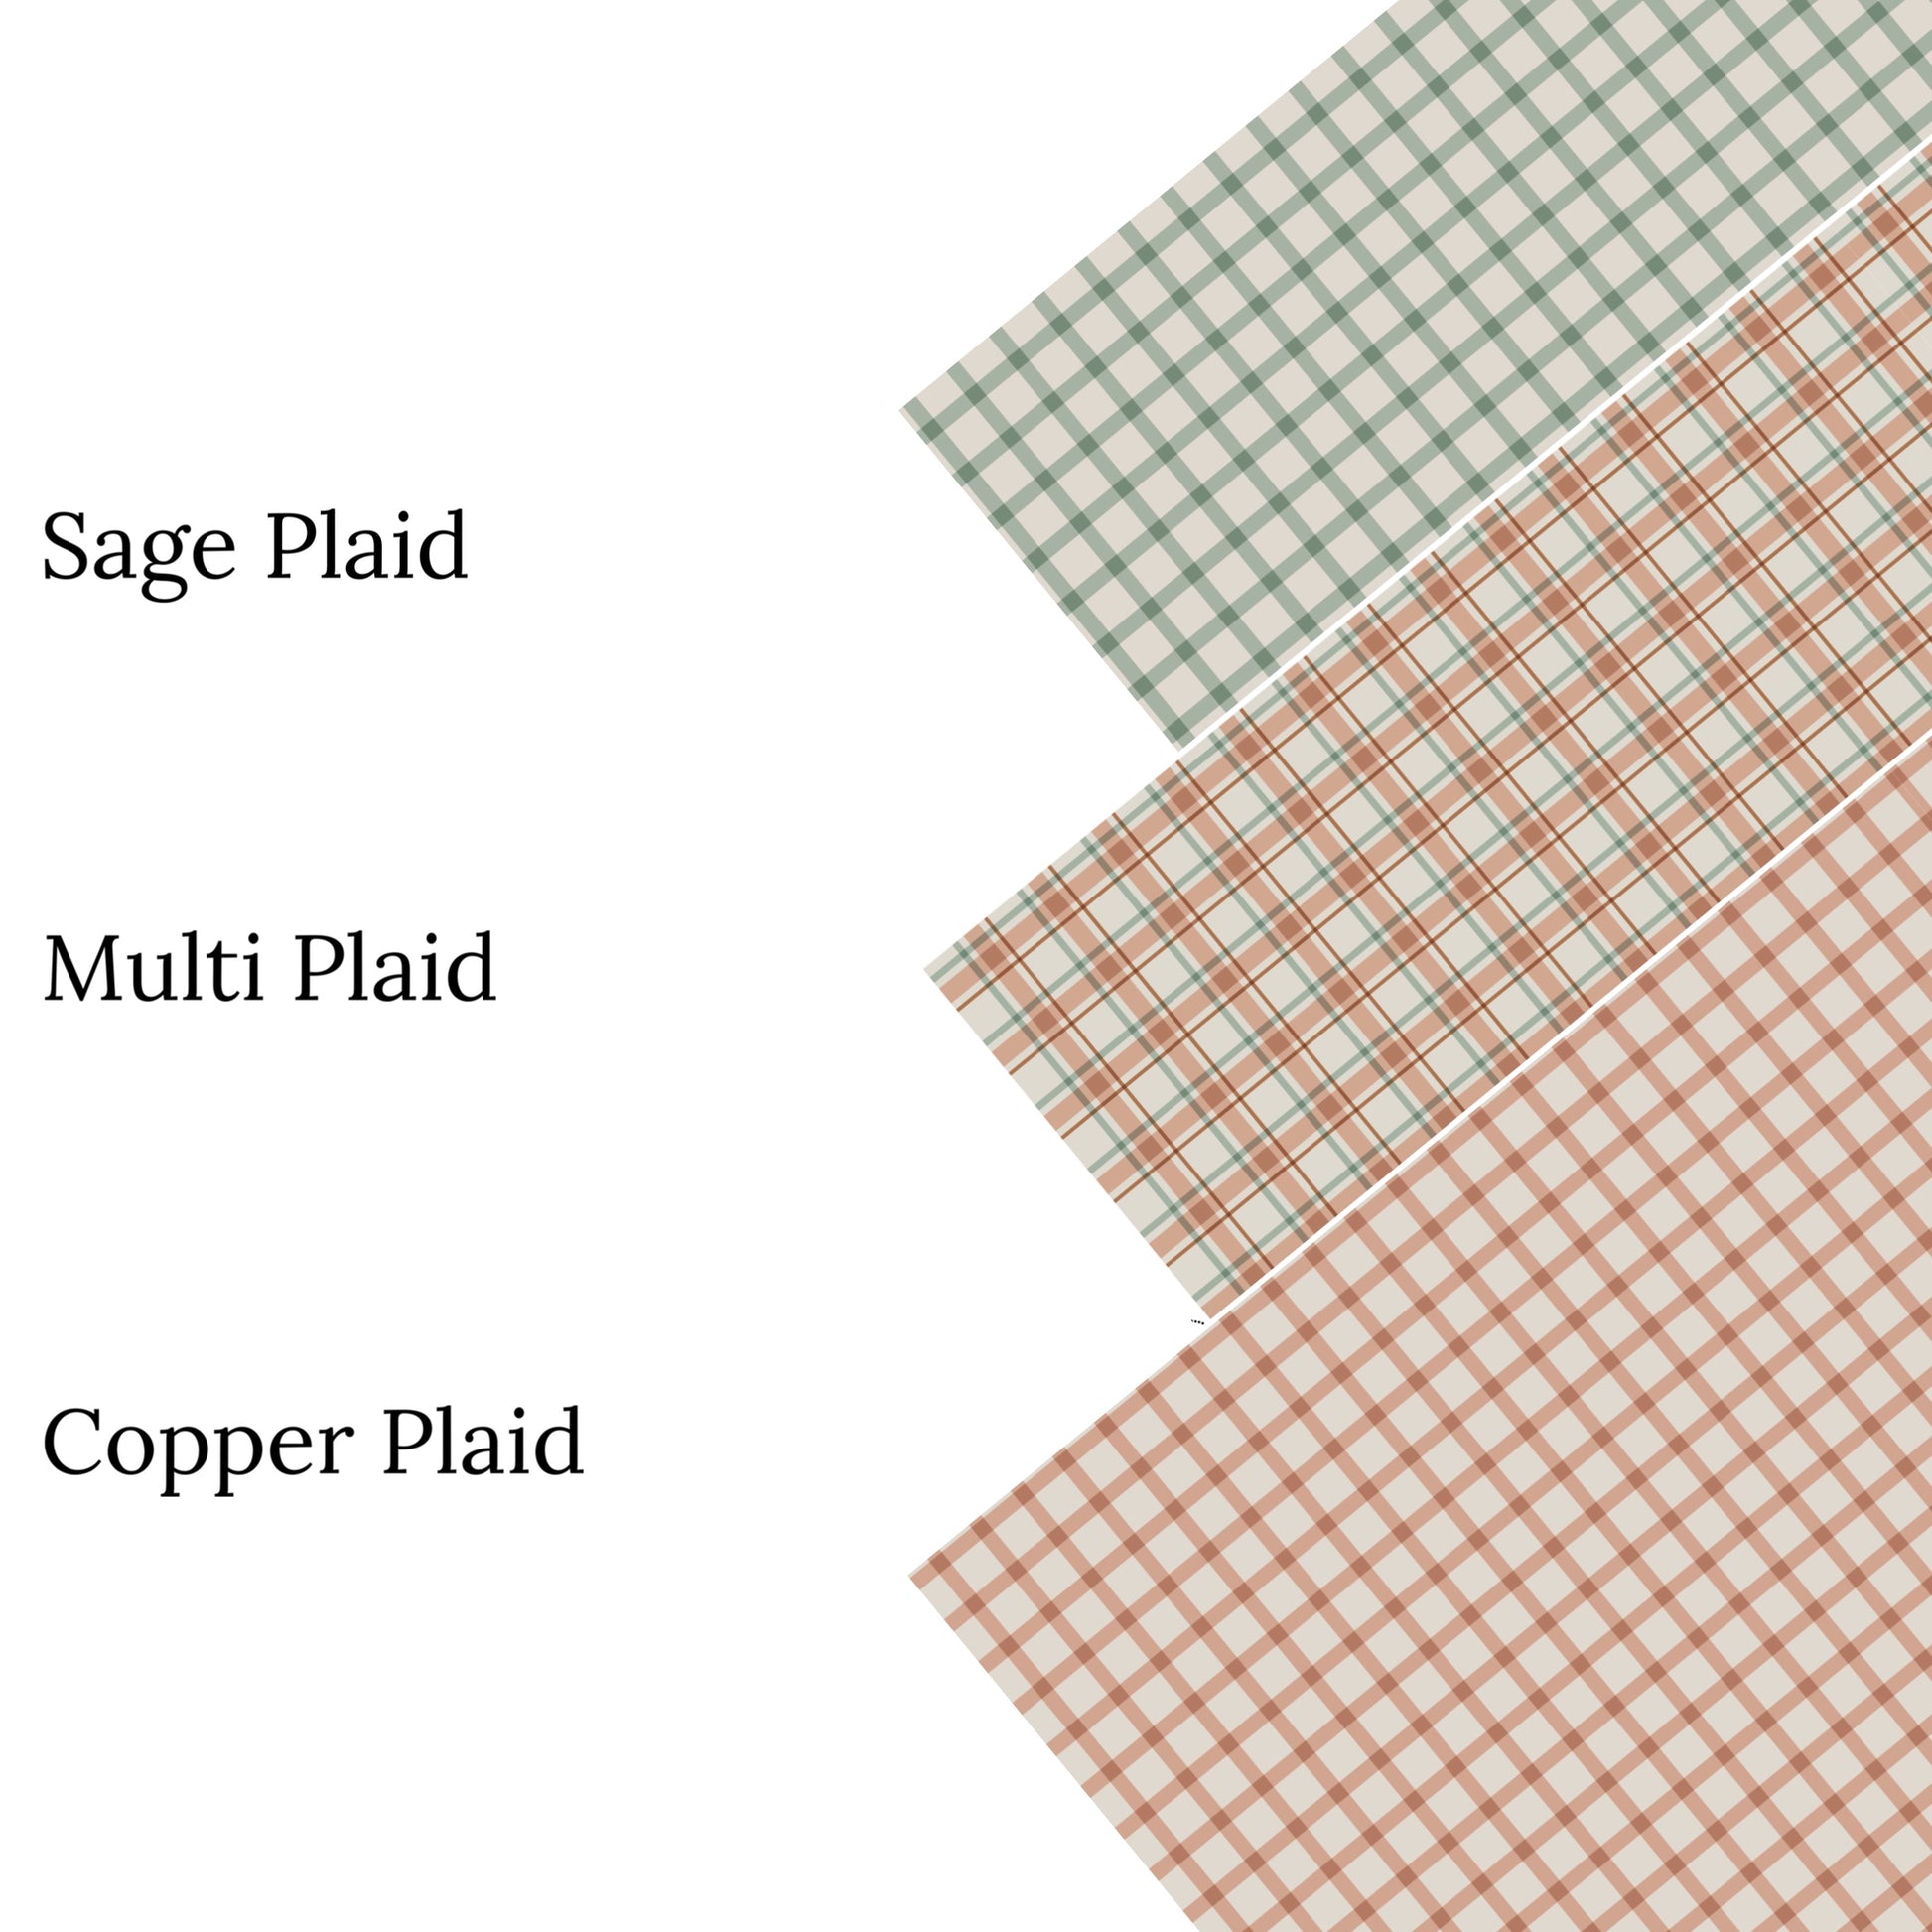 These summer pattern faux leather sheets contain the following design elements: western plaid patterns. Our CPSIA compliant faux leather sheets or rolls can be used for all types of crafting projects.